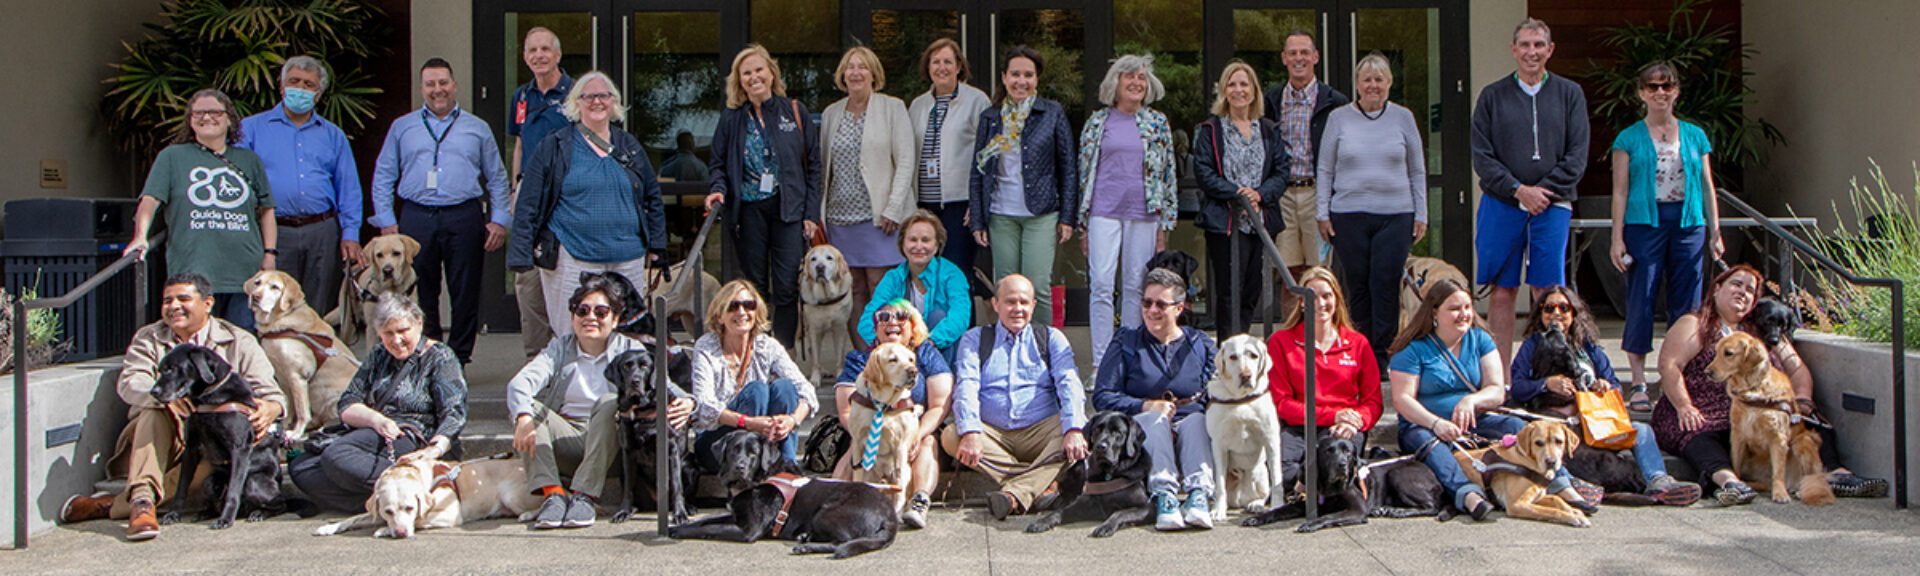 A large group of people and guide dogs pose for a group photo.